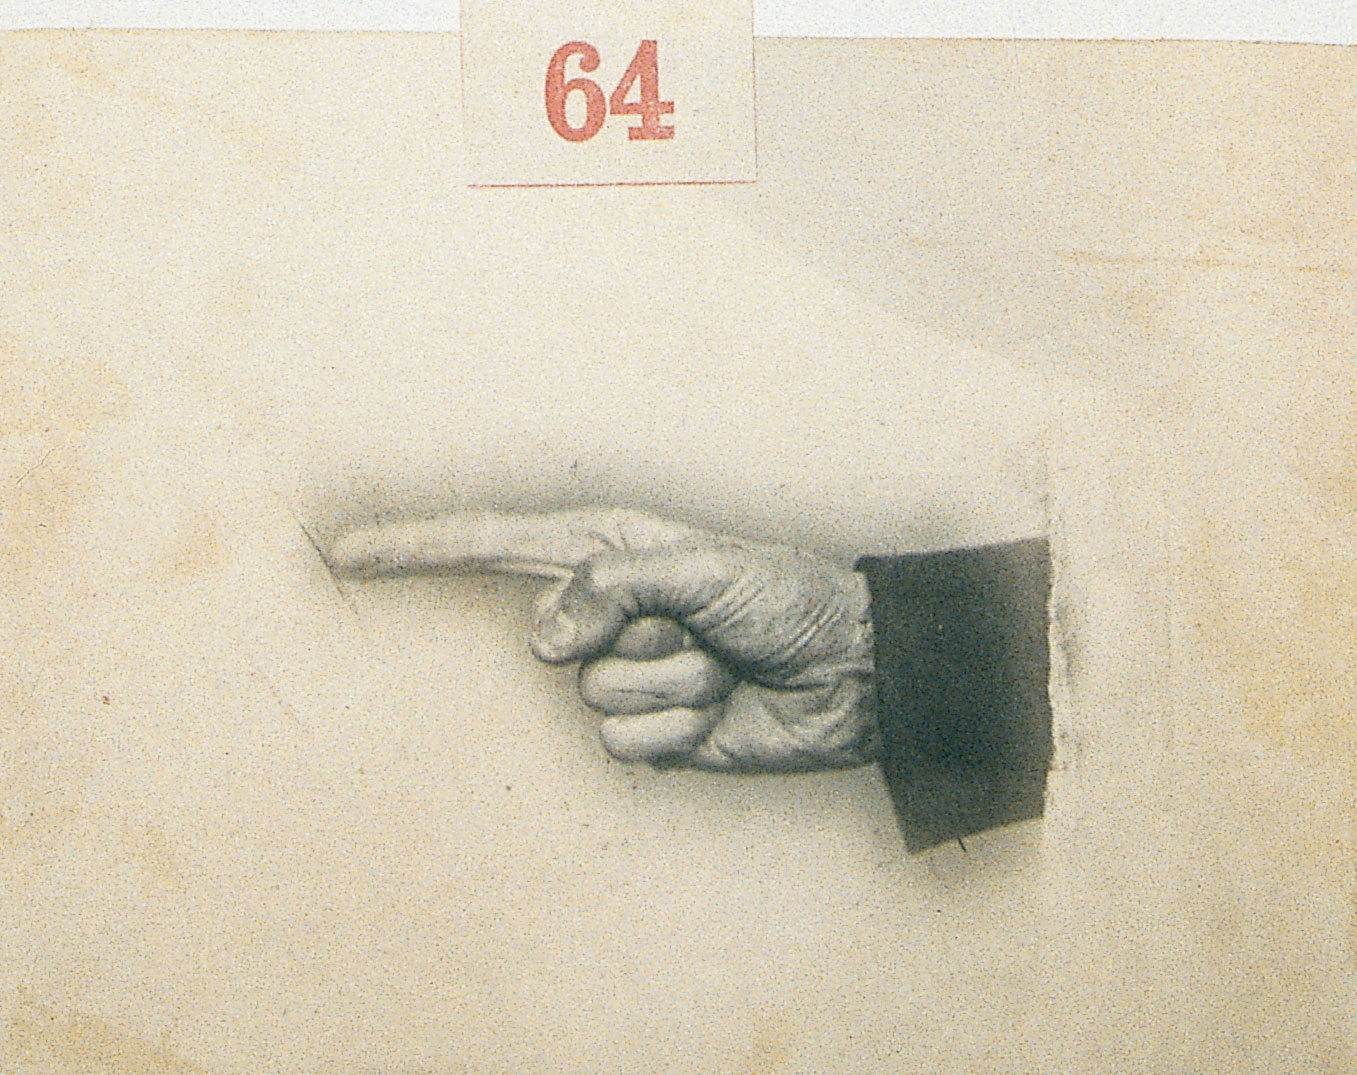 Photograph of a hand pointing left.